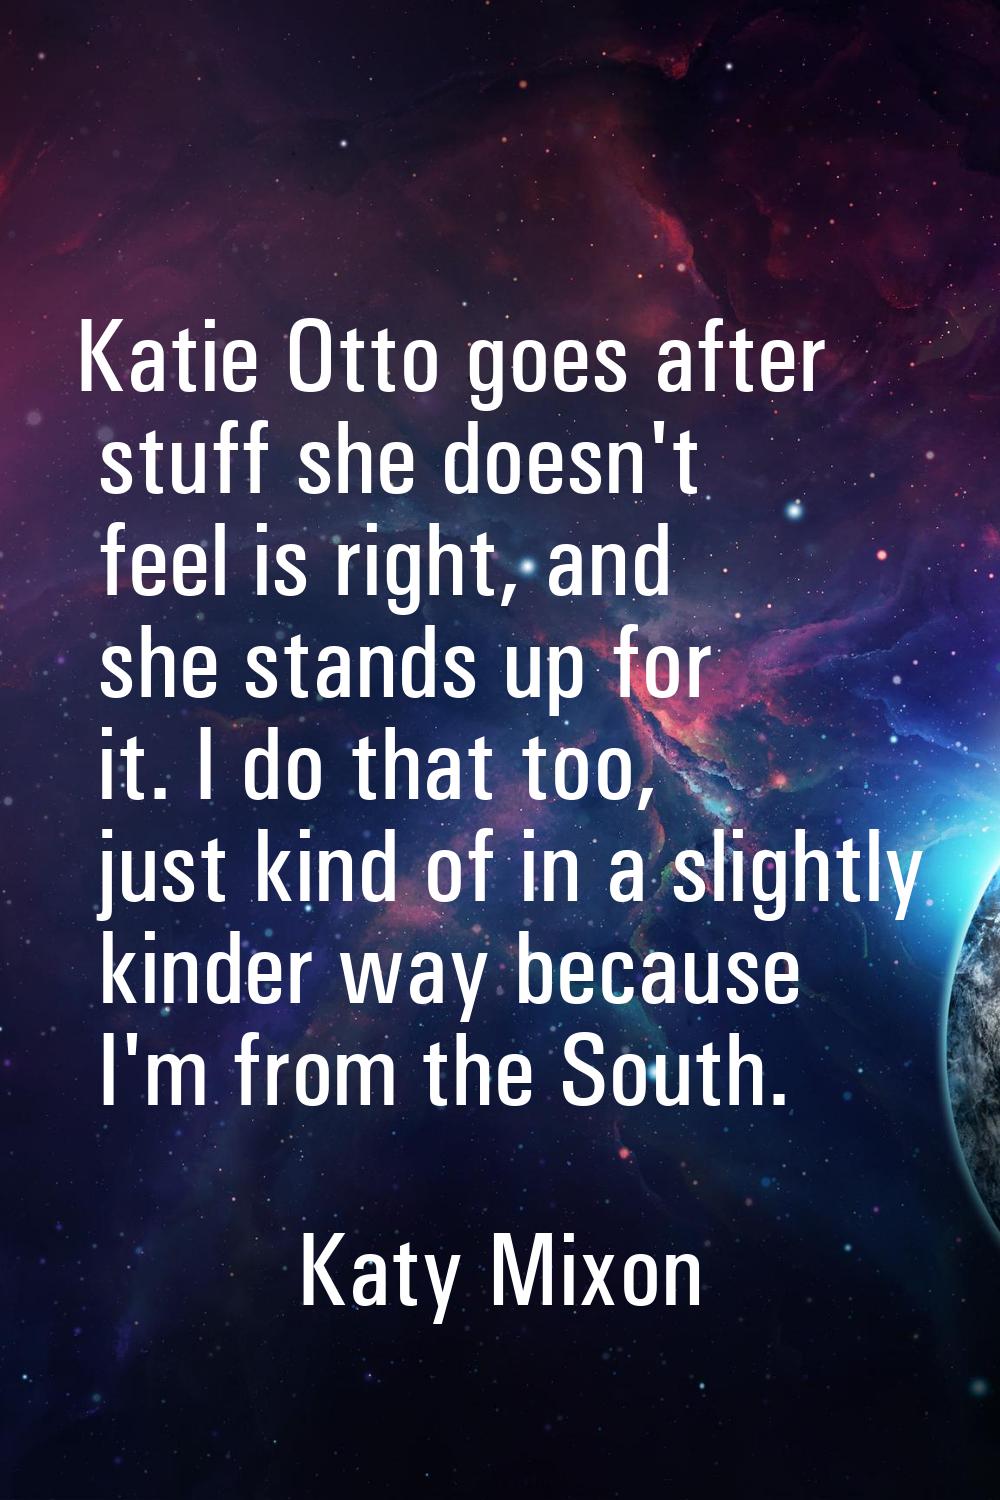 Katie Otto goes after stuff she doesn't feel is right, and she stands up for it. I do that too, jus